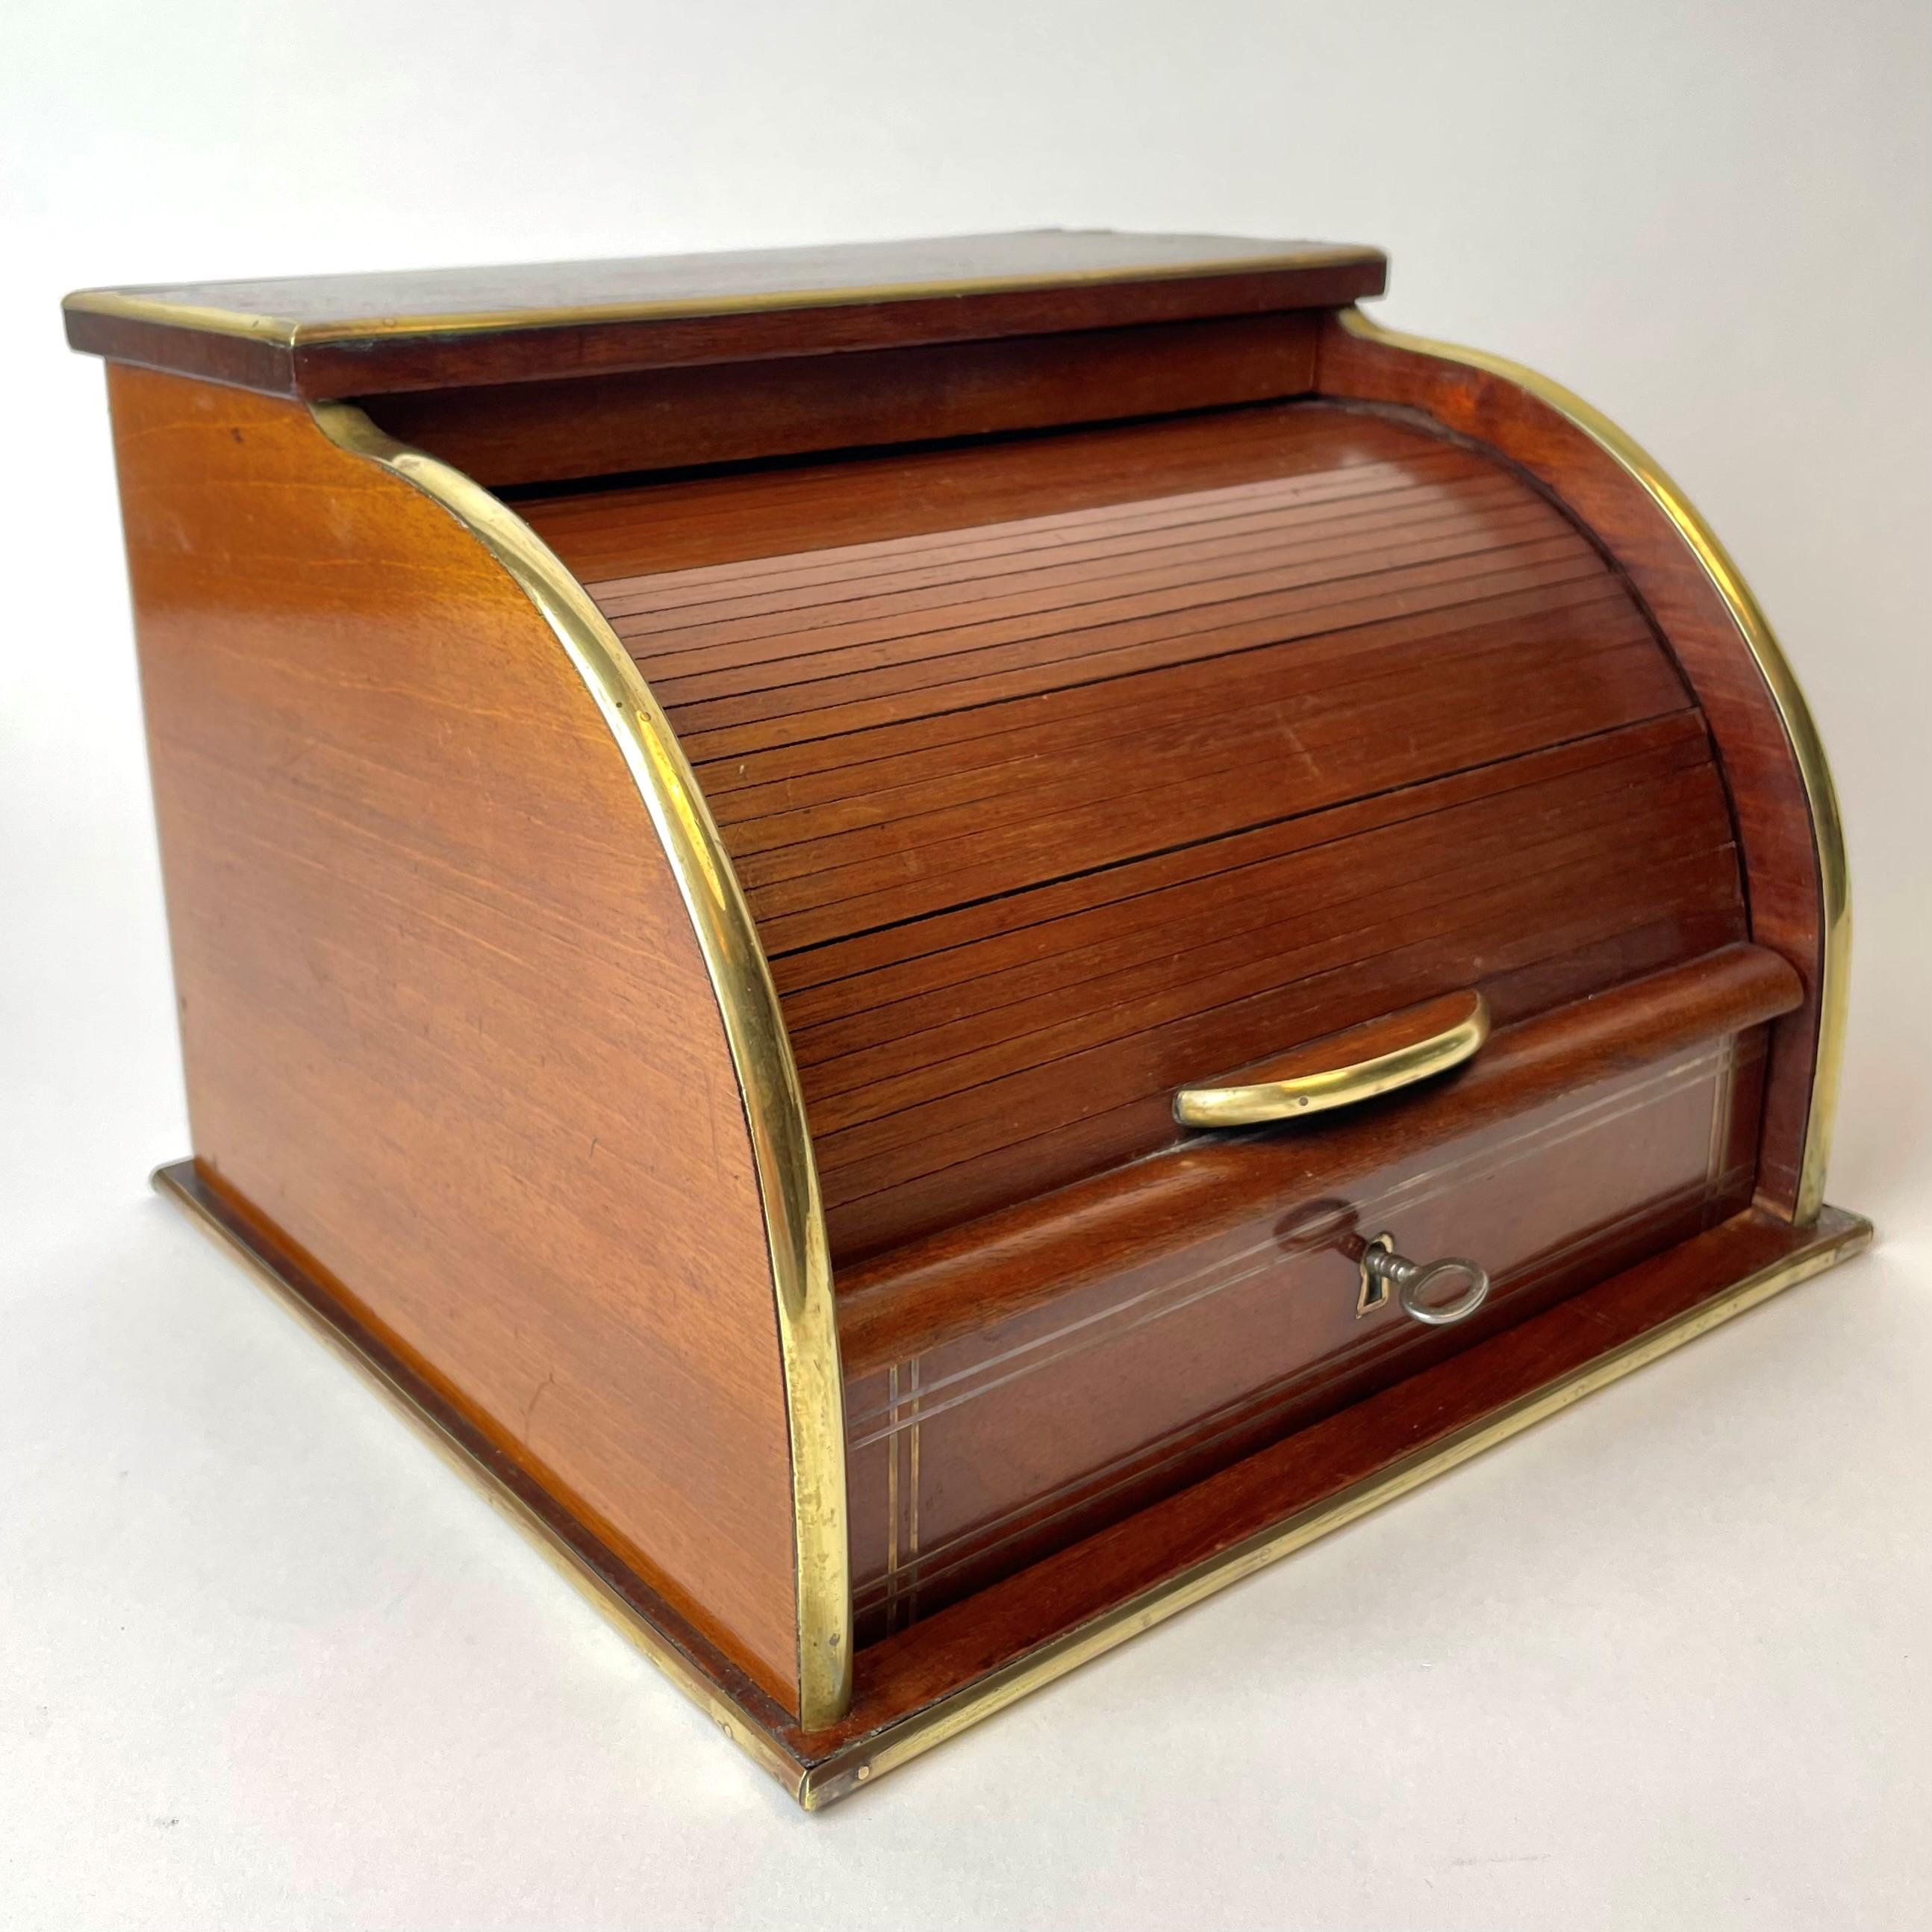 Elegant letterbox in mahogany (Swietenia mahagoni) with brass inlay decoration. The interior consists of shelves and a lockable drawer with a working key.

The letterbox is probably from the early 20th century.


Wear consistent with age and